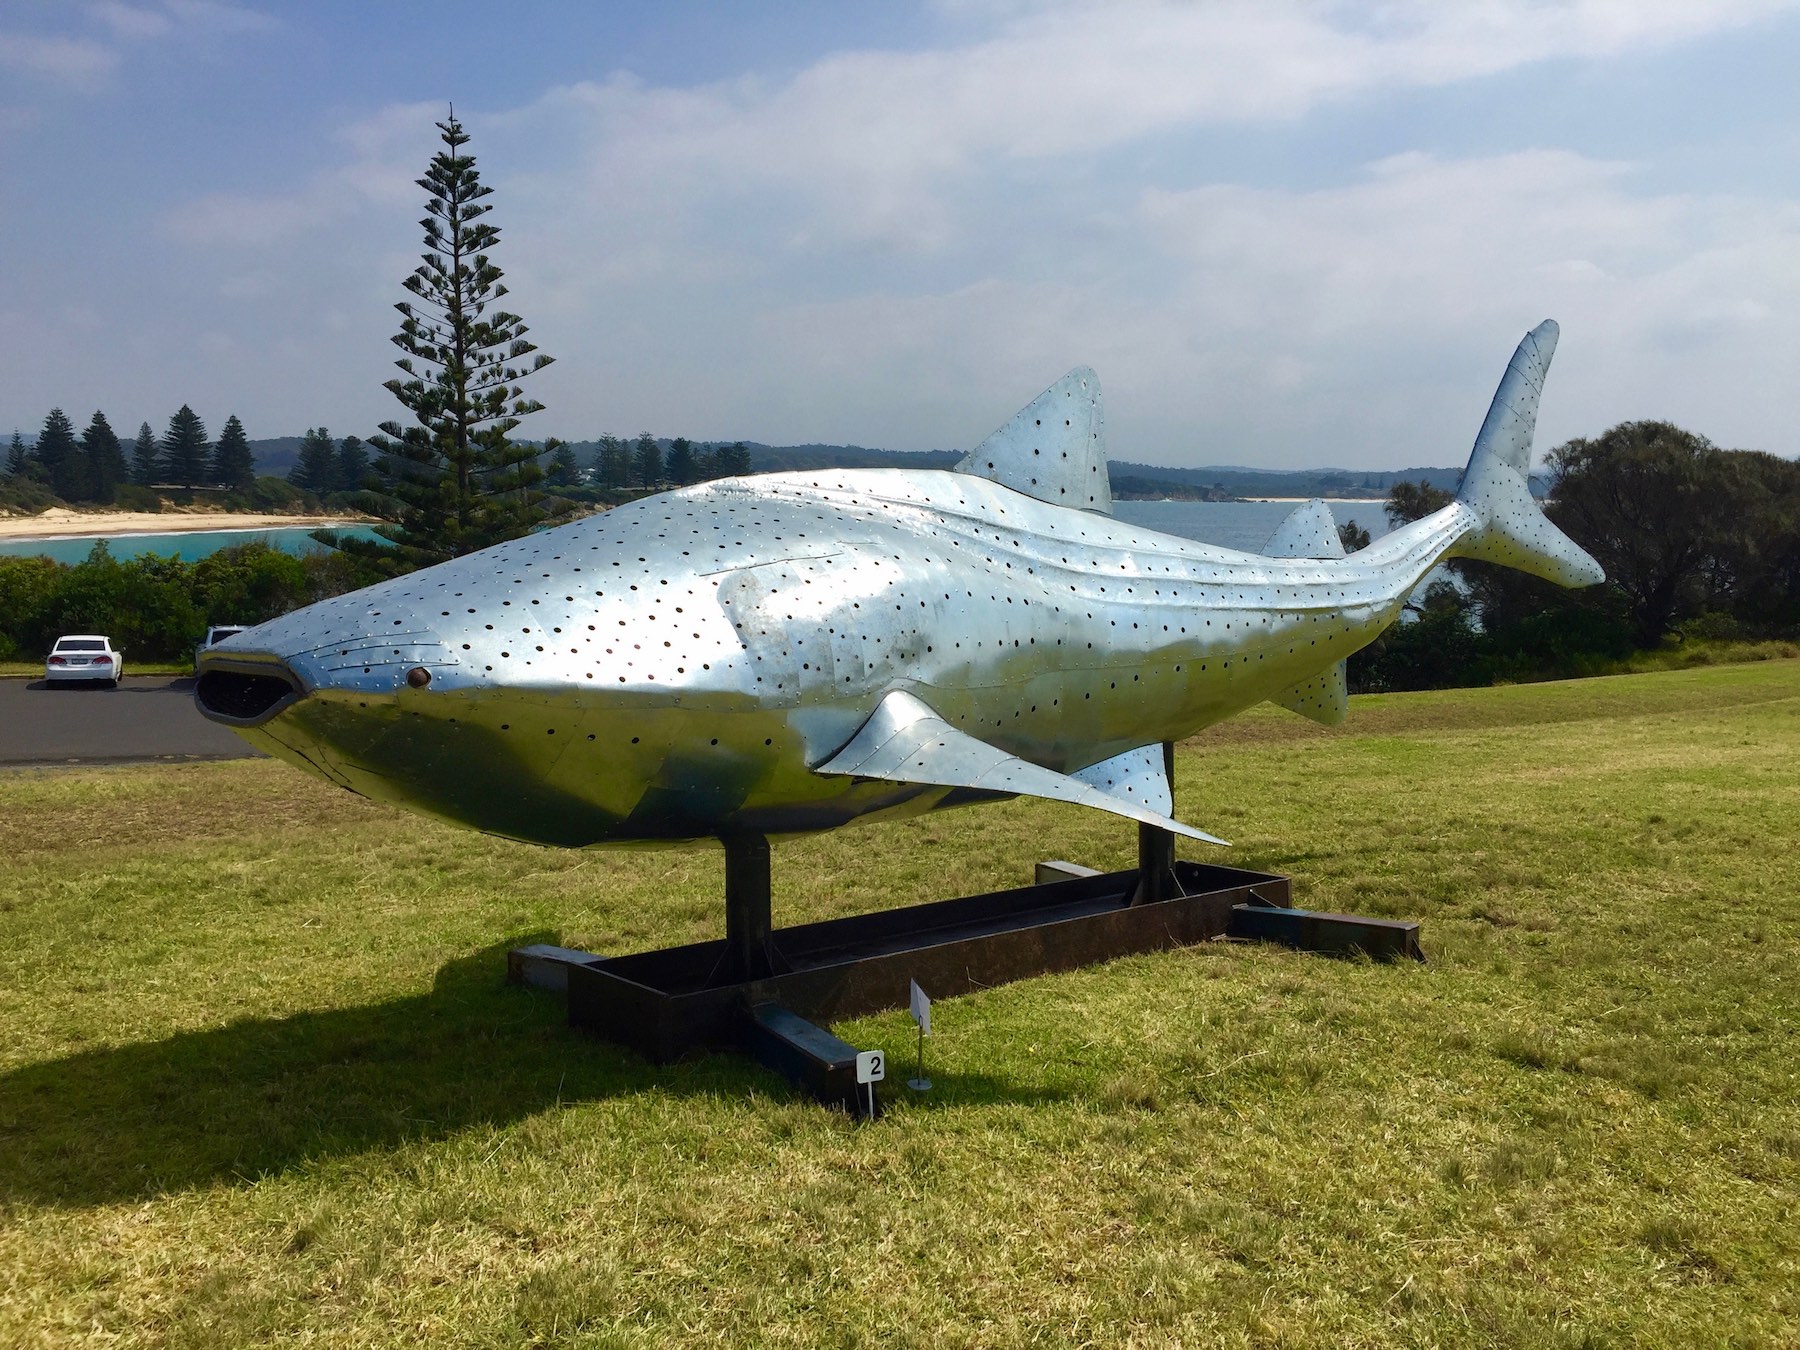 Sculpture Bermagui, on now - fusing art and environment